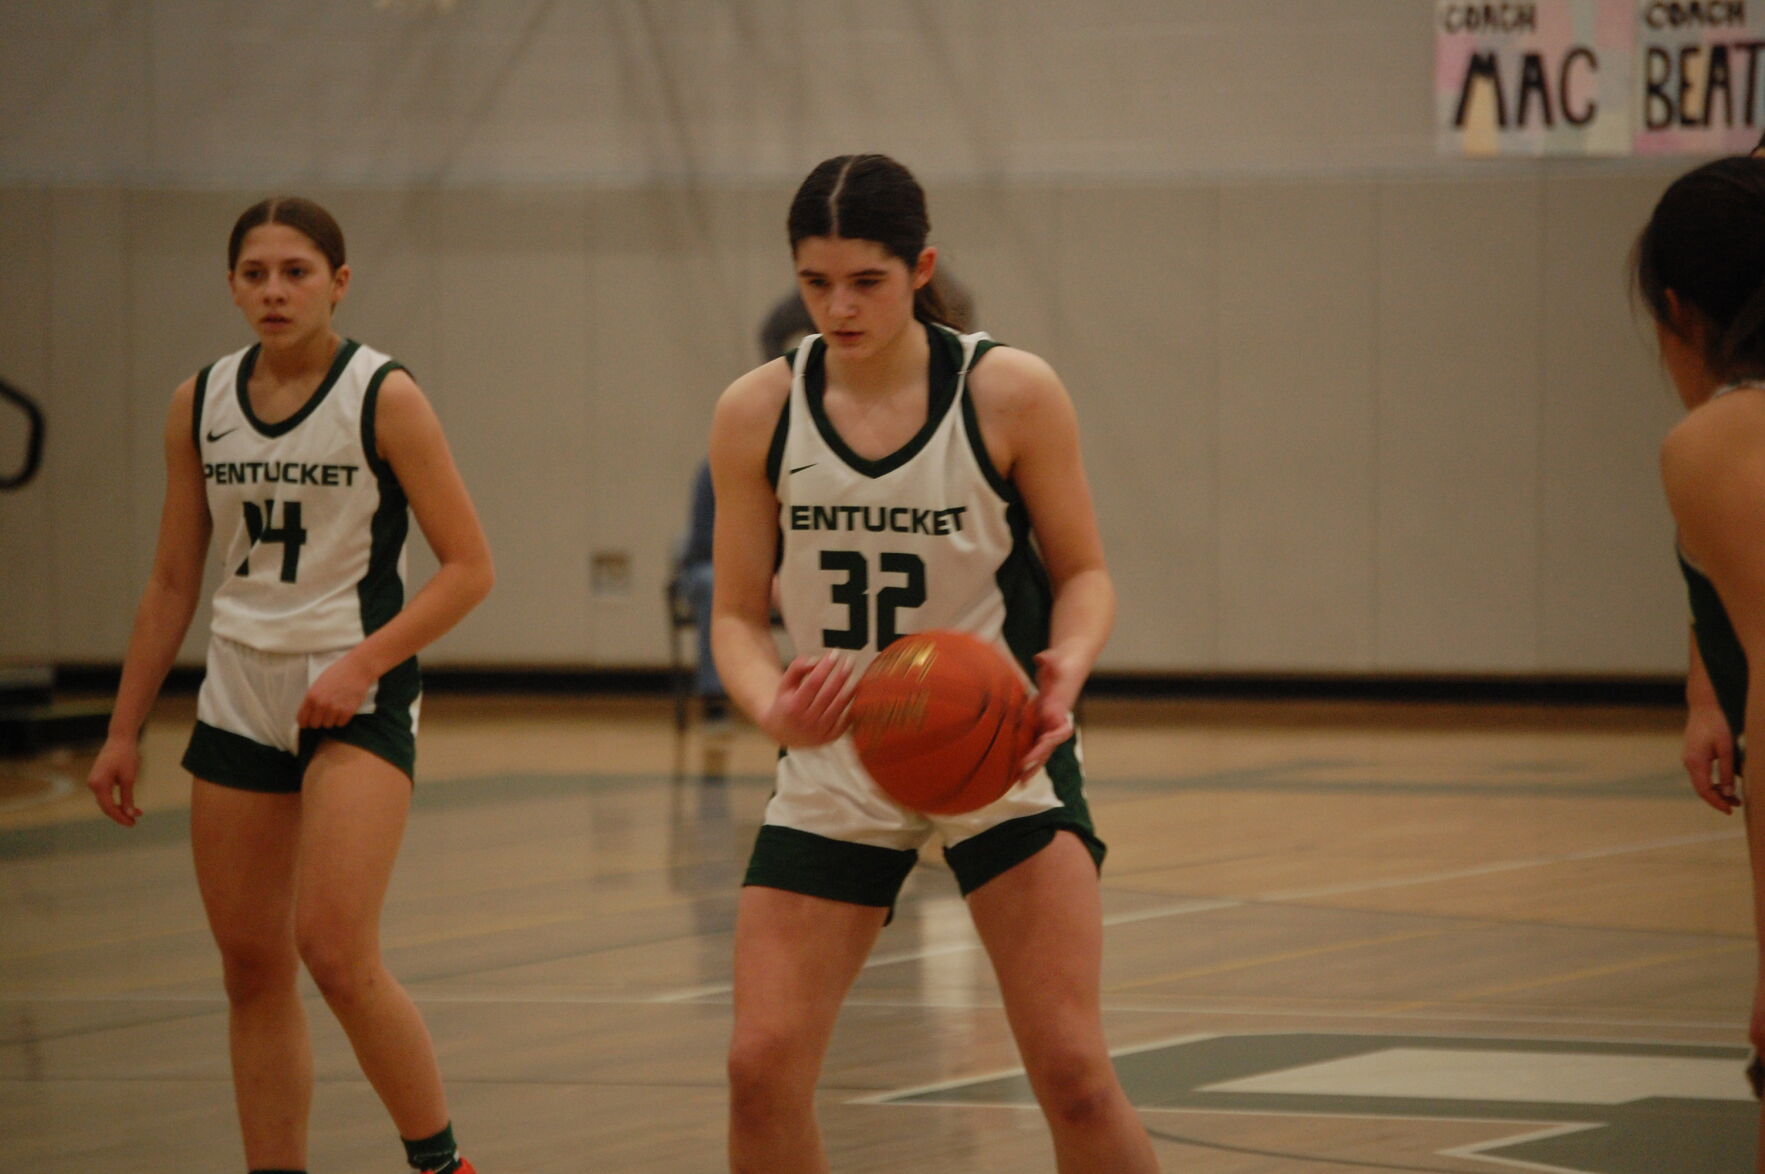 Pentucket’s Thrilling Victory: Amelia Crowe’s 19 Points and Gabby Bellacqua’s Game-Saving Block Seal 46-44 Win